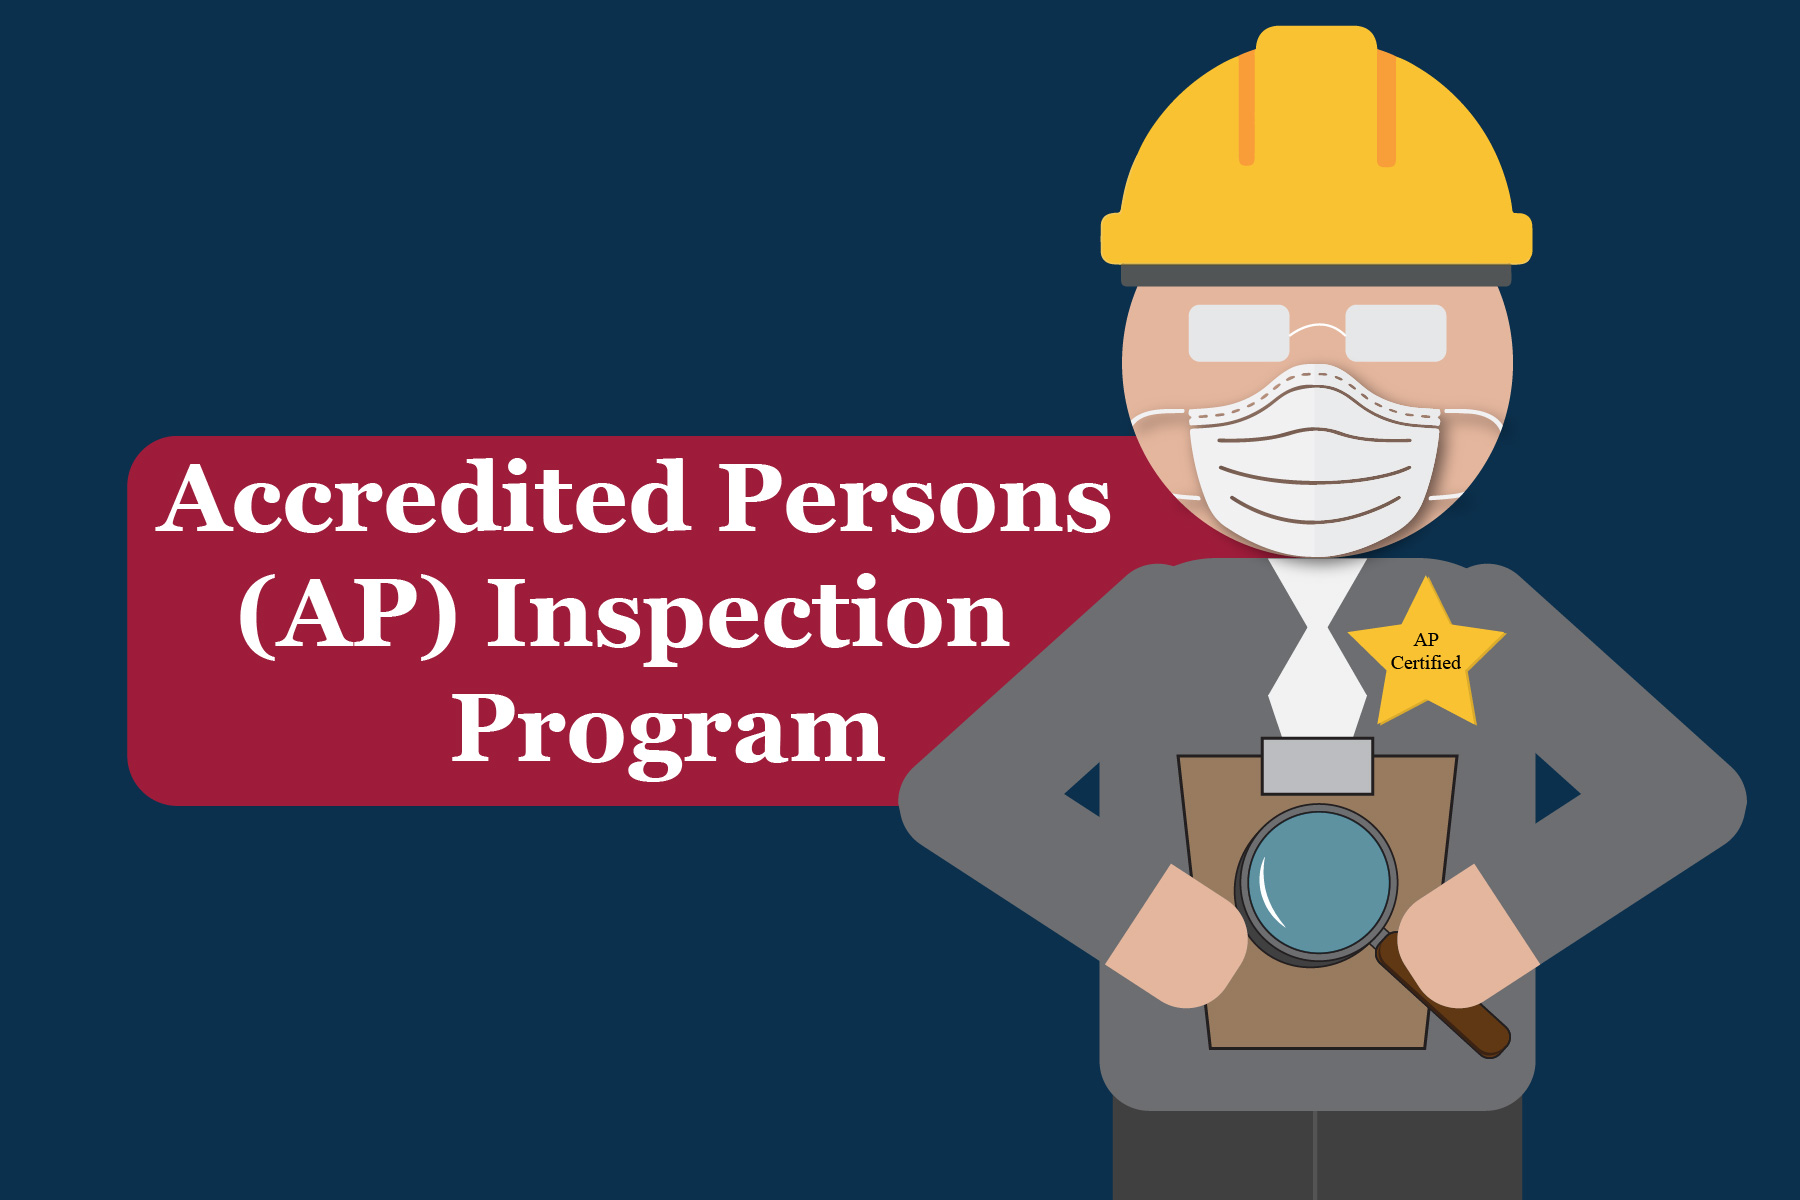 Accredited Persons (AP) Inspection Program